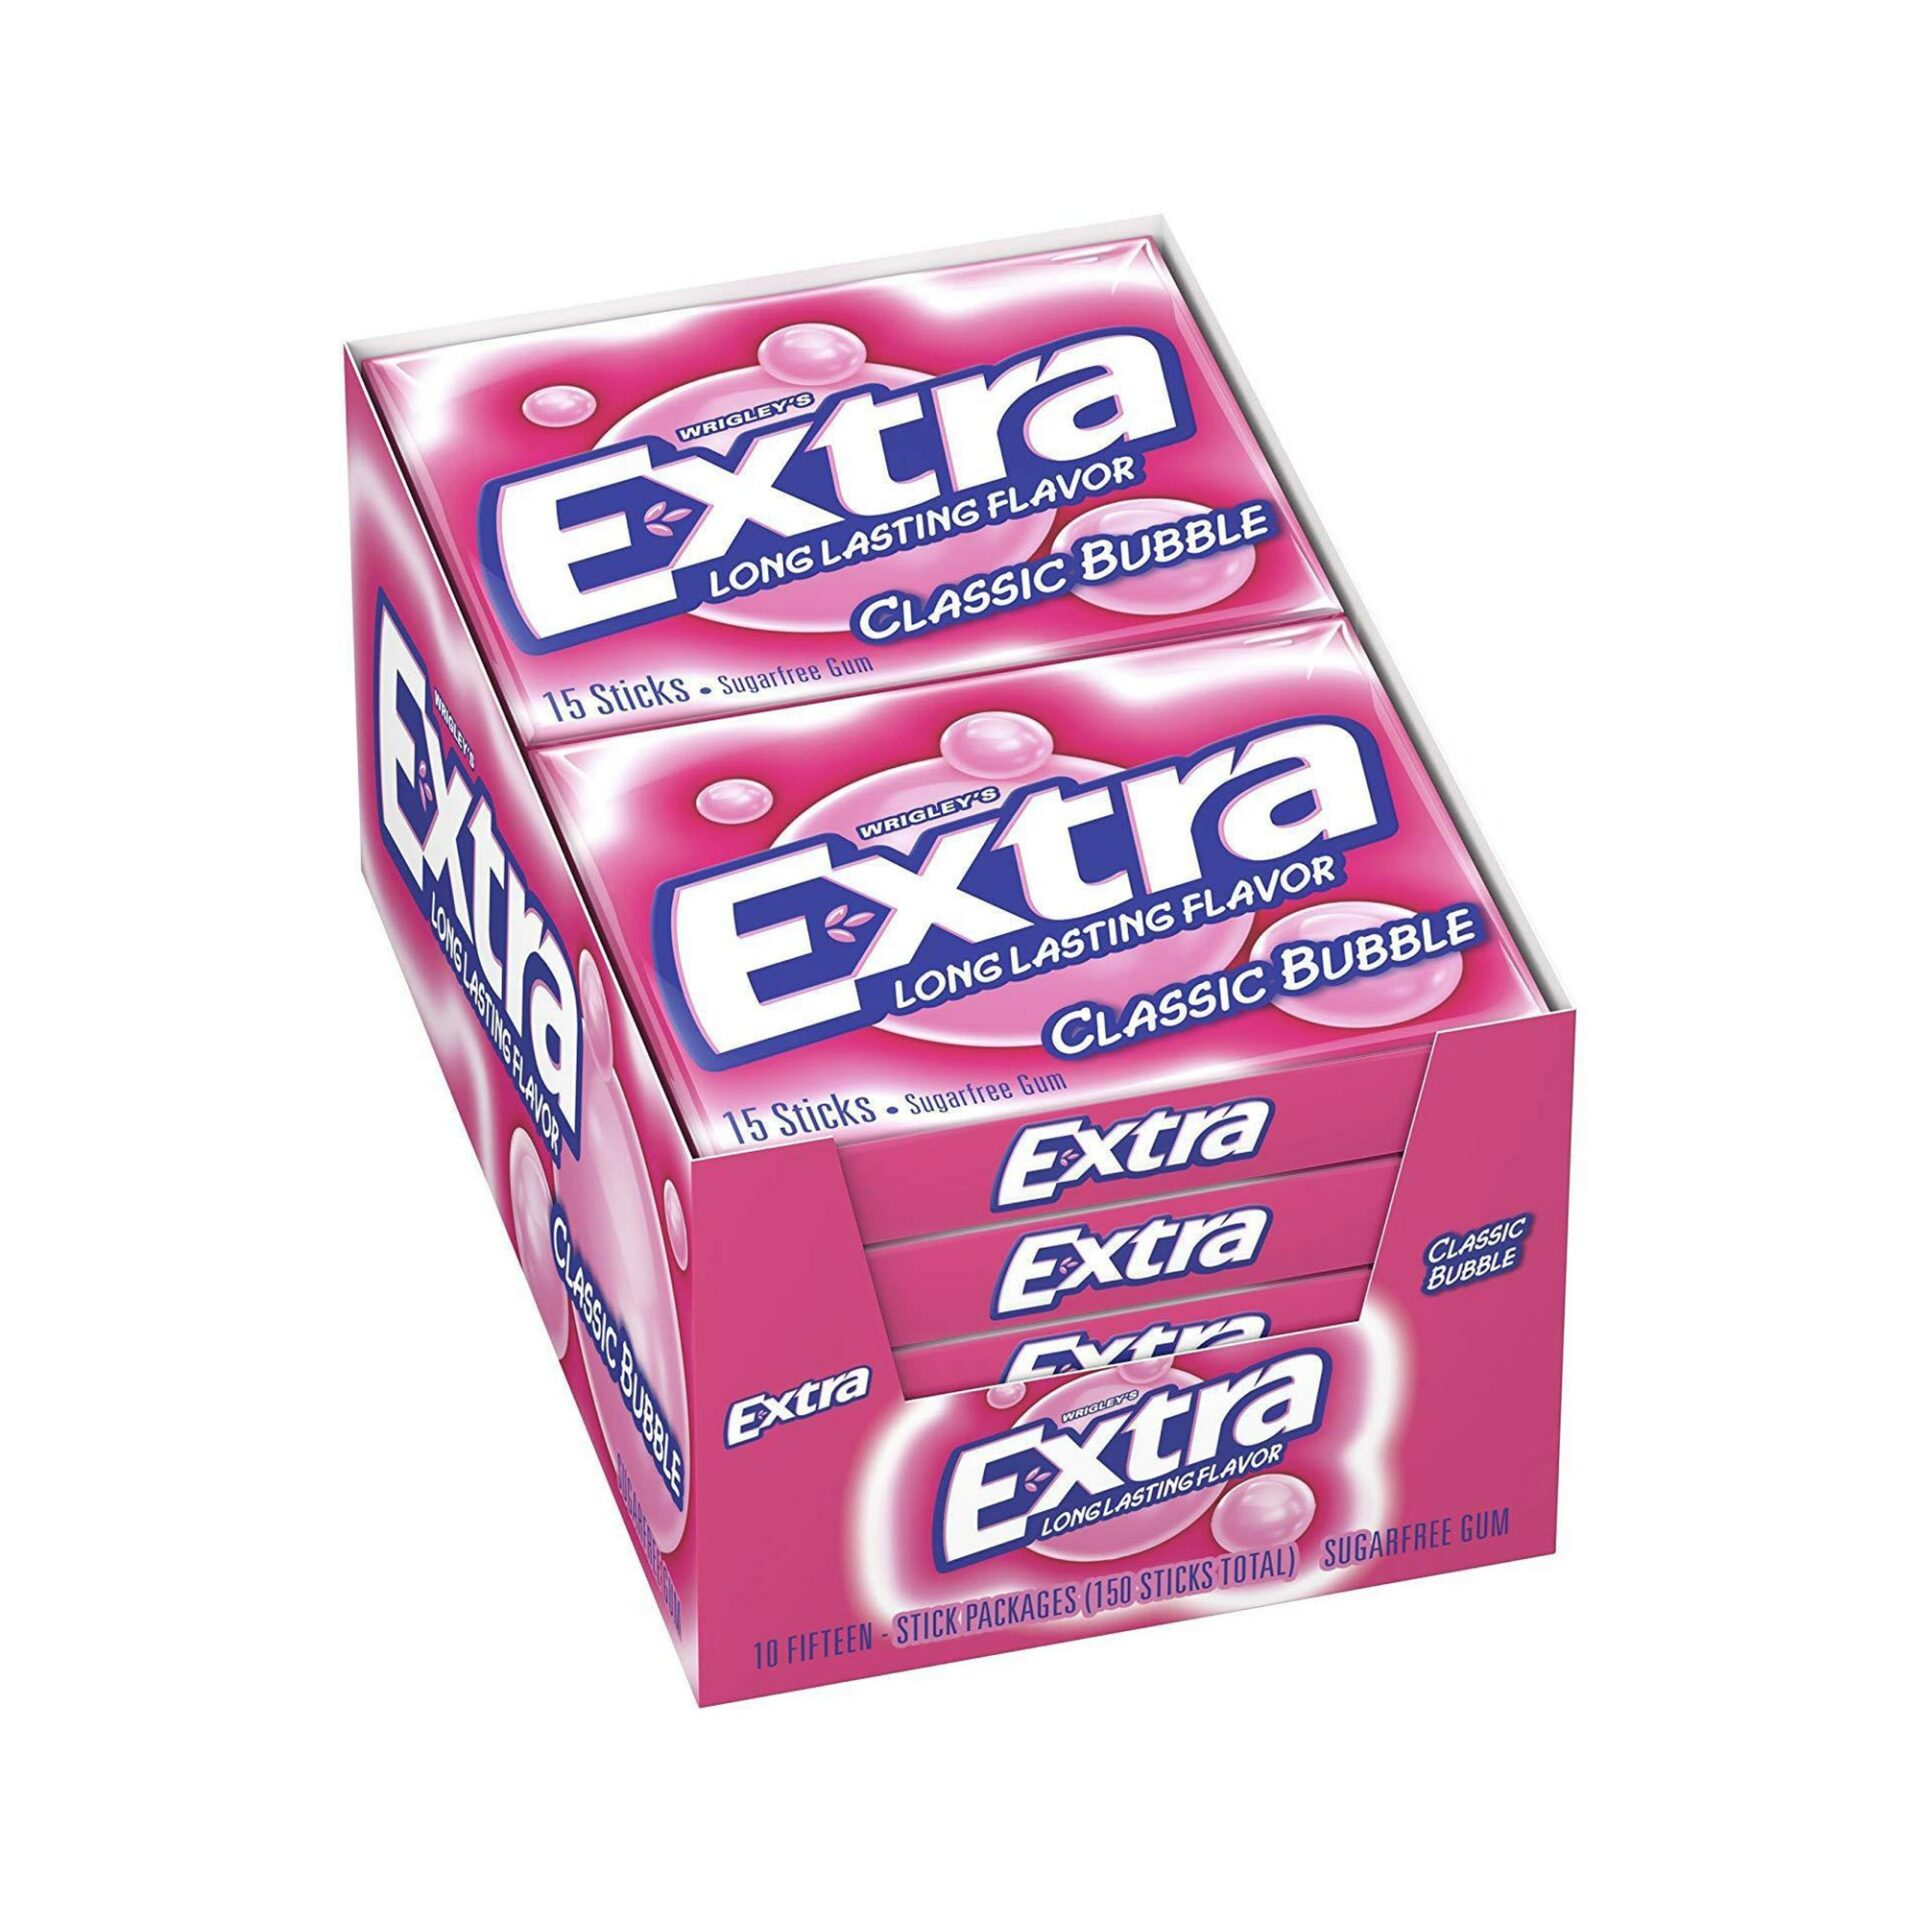 EXTRA Apple Flavour Sugarfree Chewing Gum 10 pieces